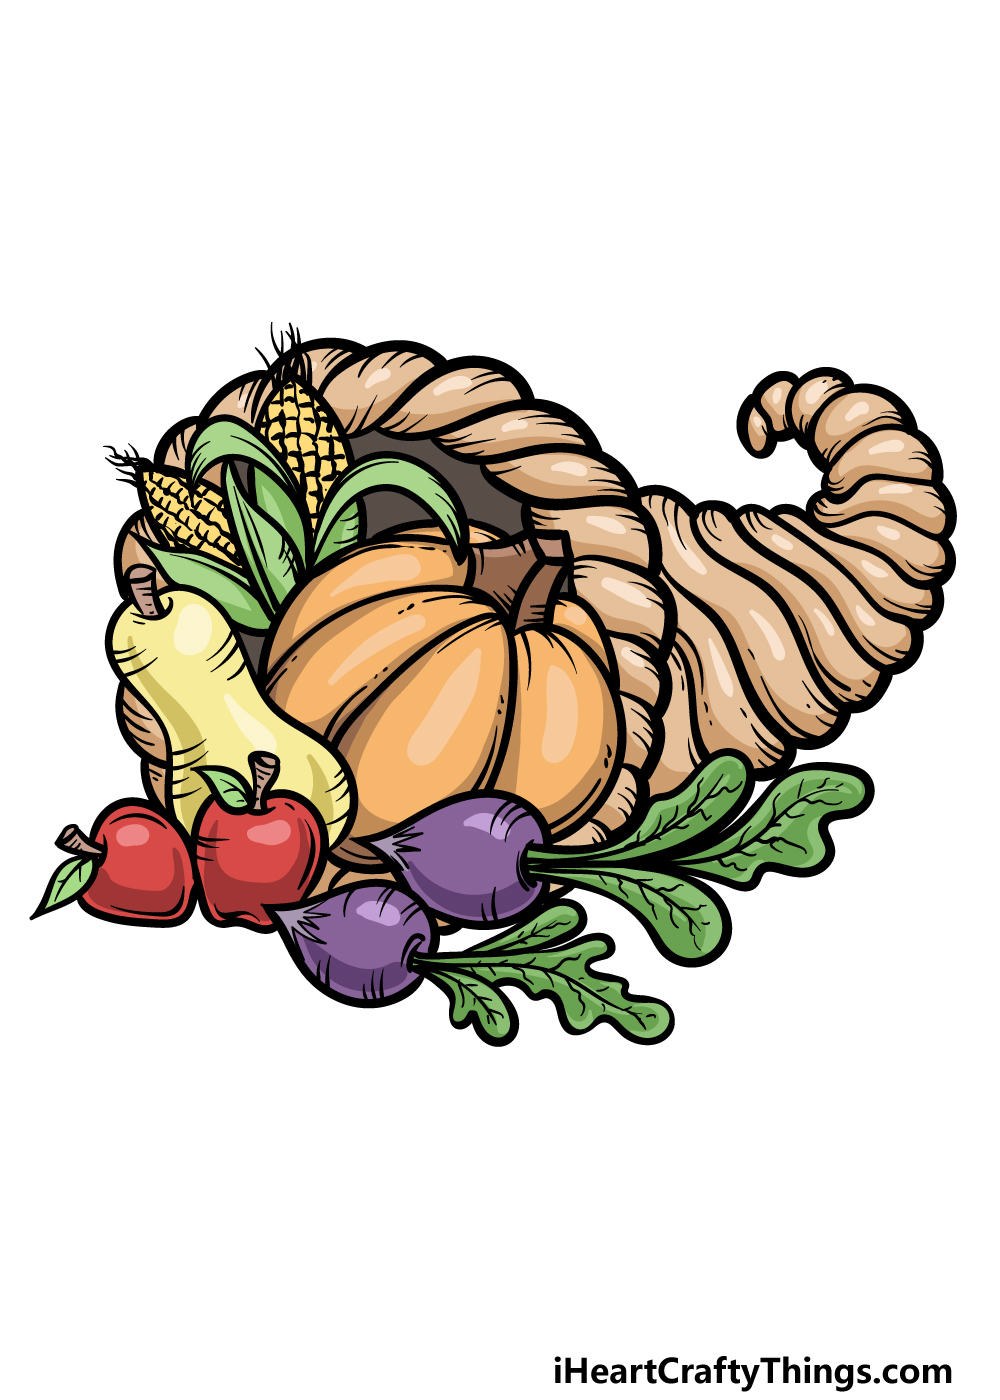 how to draw Thanksgiving ideas step 6